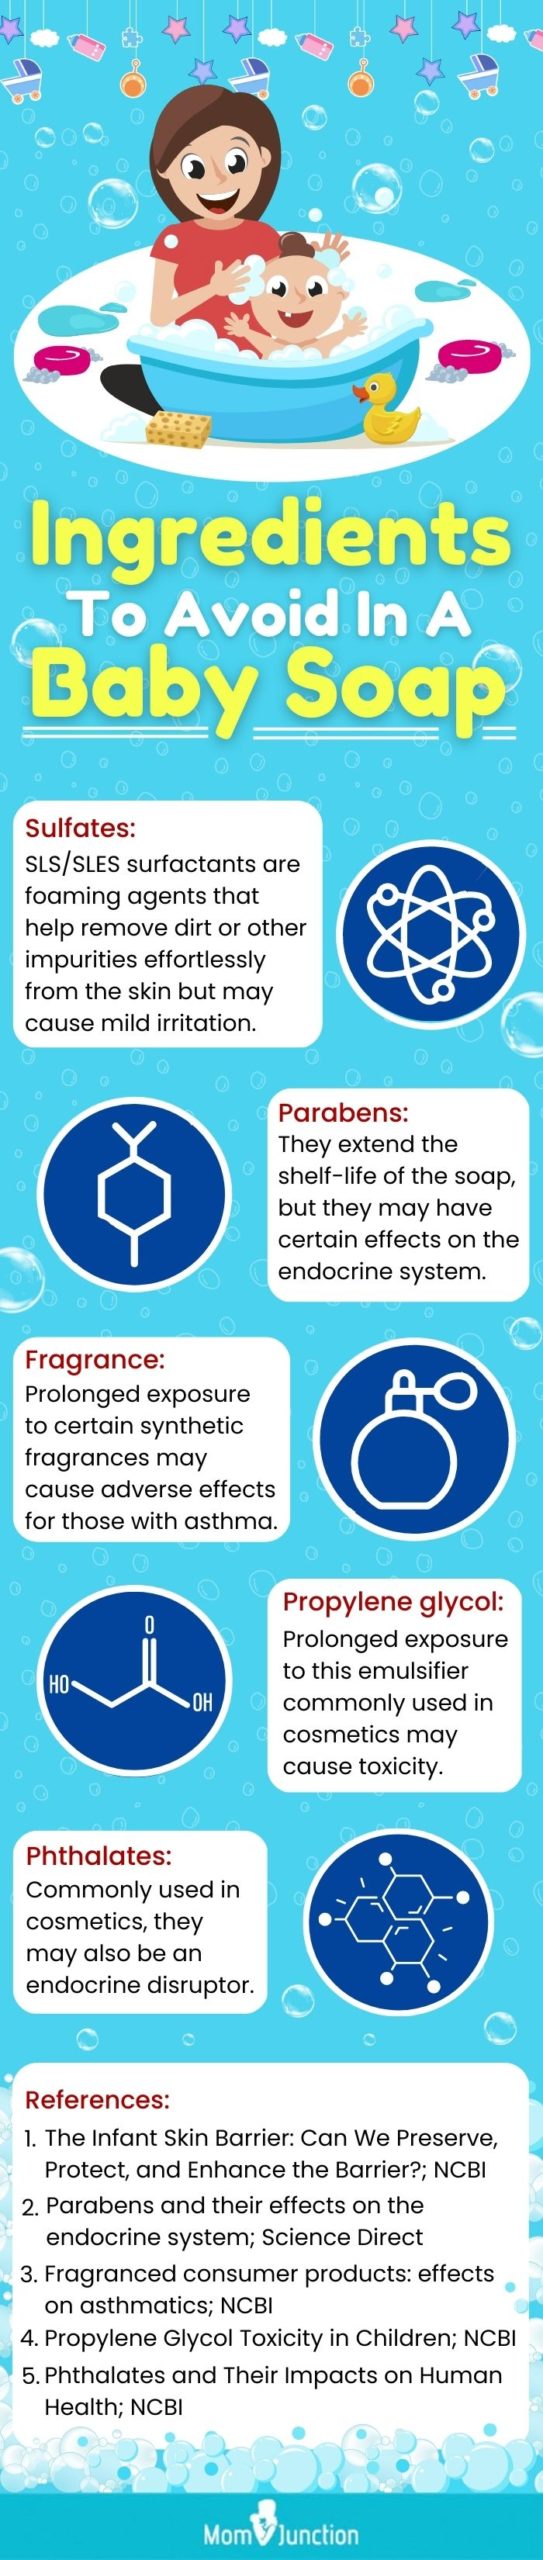 Ingredients To Avoid In A Baby Soap